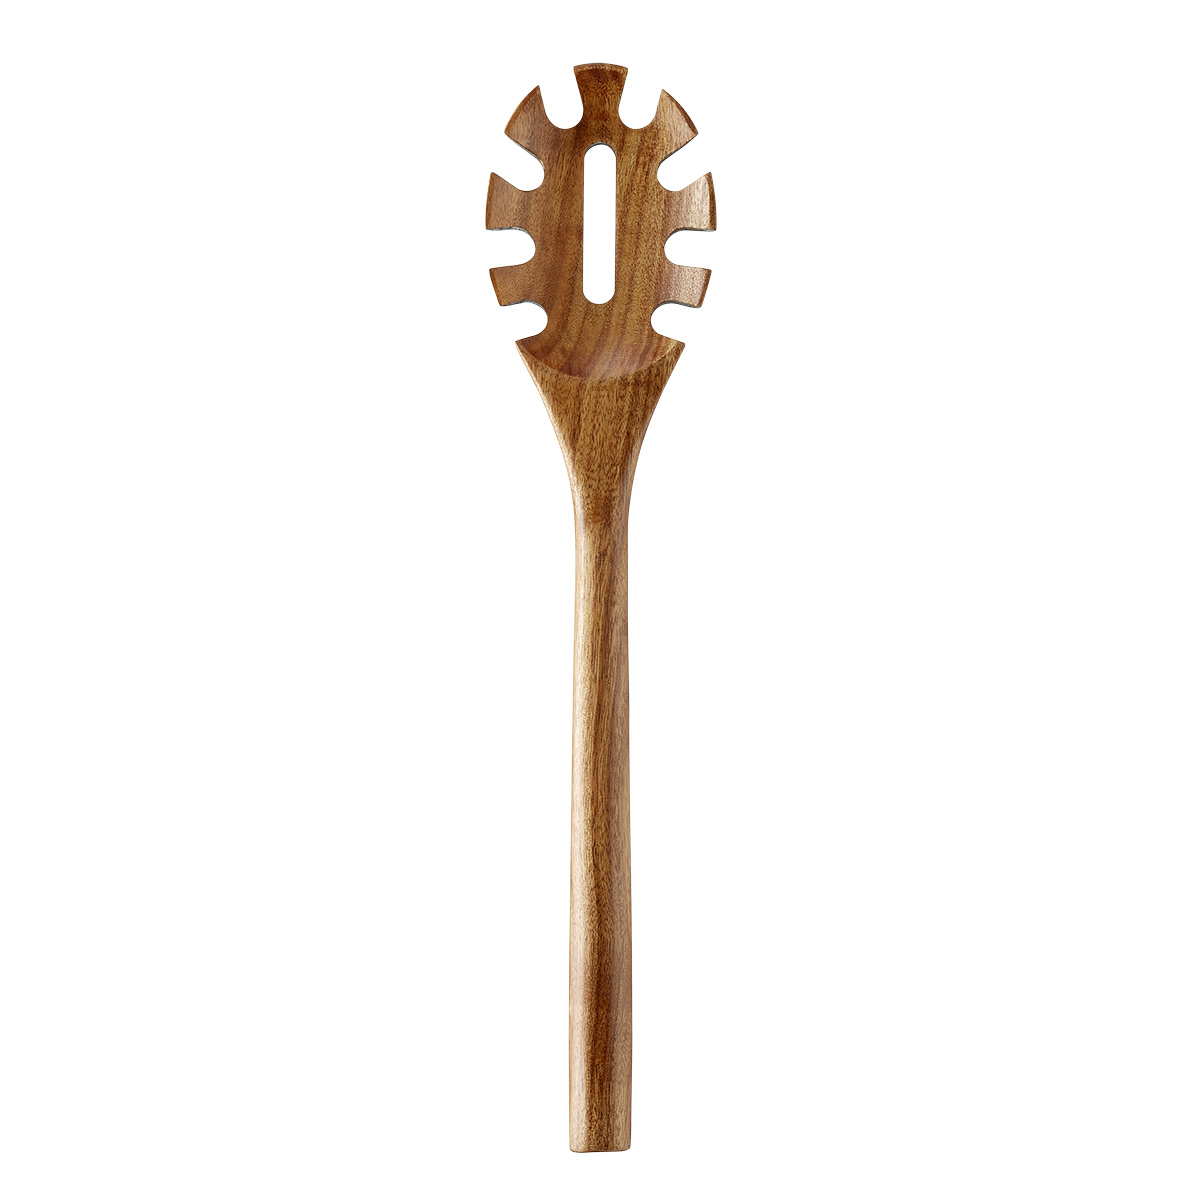 https://www.containerstore.com/catalogimages/453485/10090216_Acacia_Pasta_Spoon_Silo.jpg